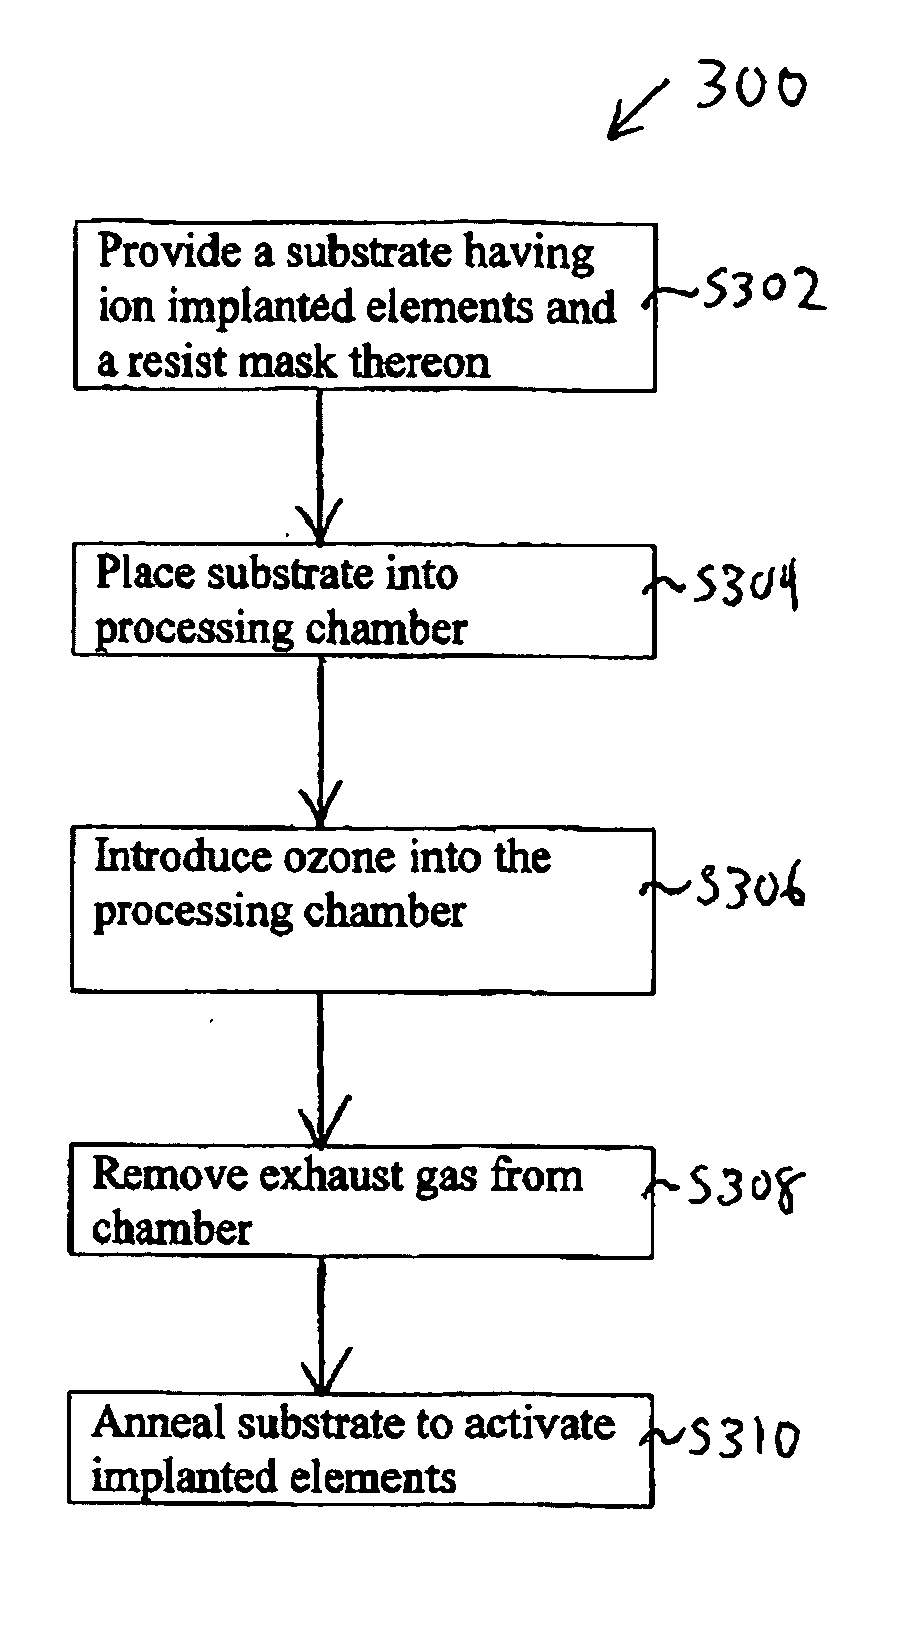 Integrated ashing and implant annealing method using ozone